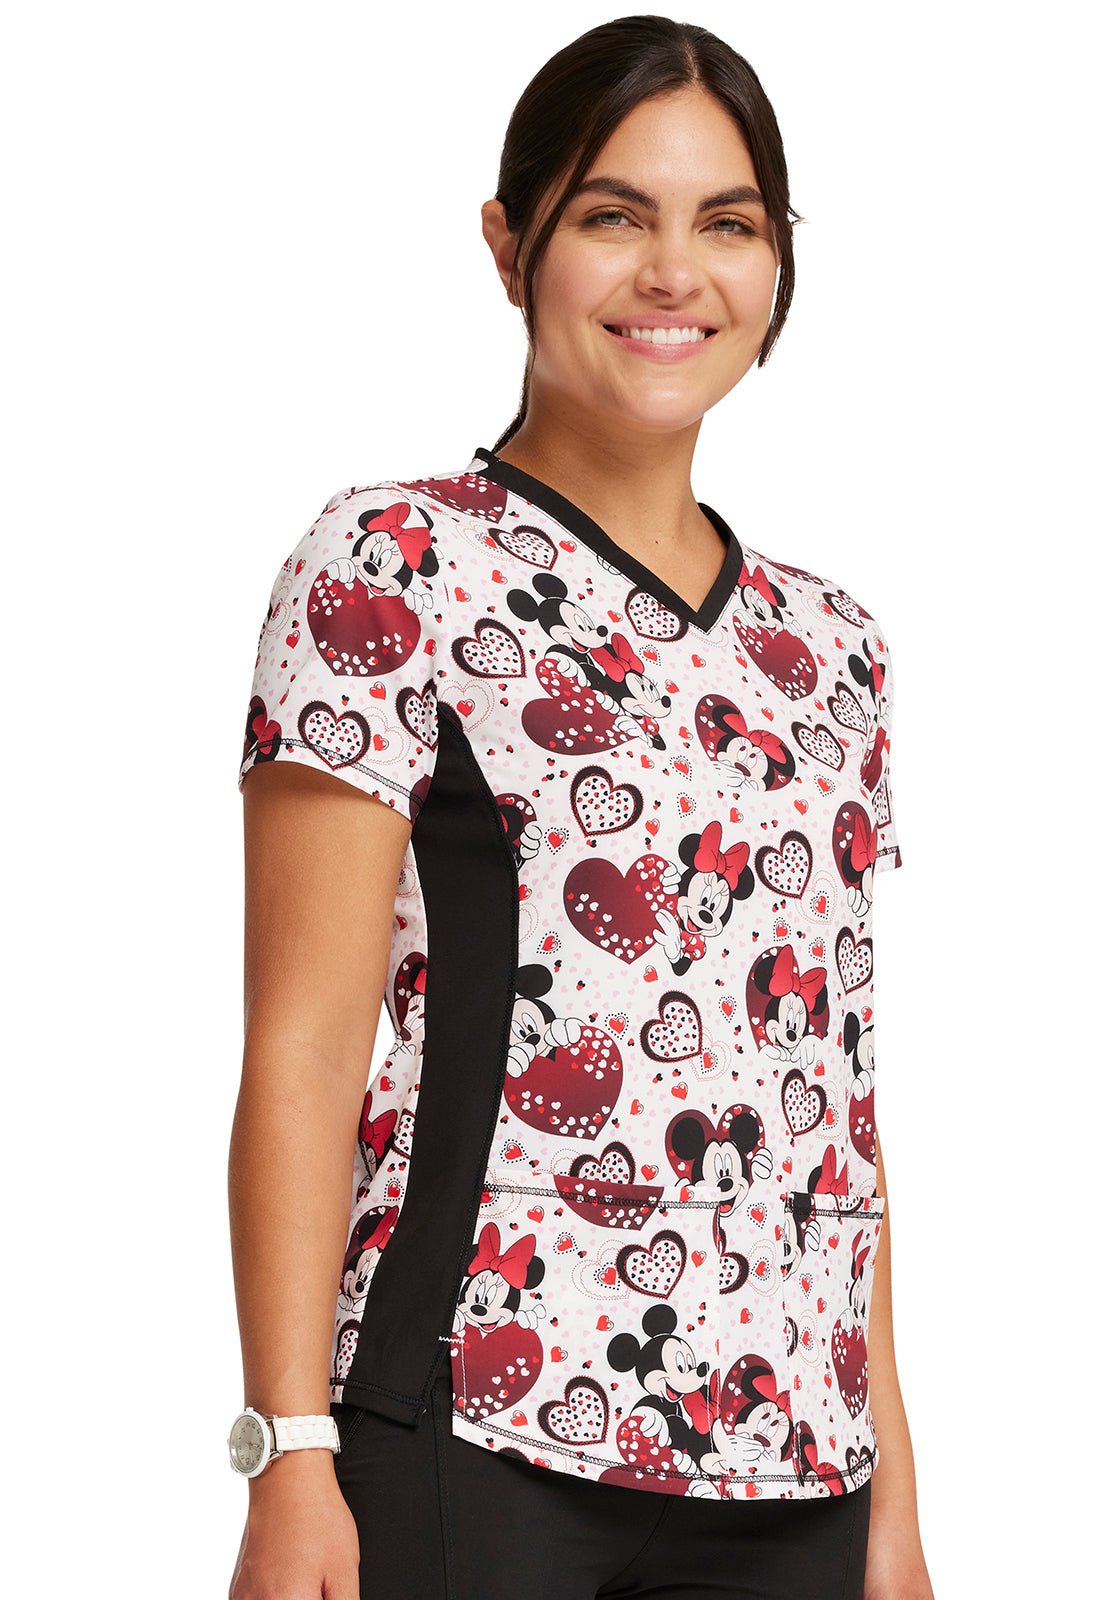 Mickey Minnie Mouse Tooniforms Disney V Neck Top TF783 MKRH - Scrubs Select